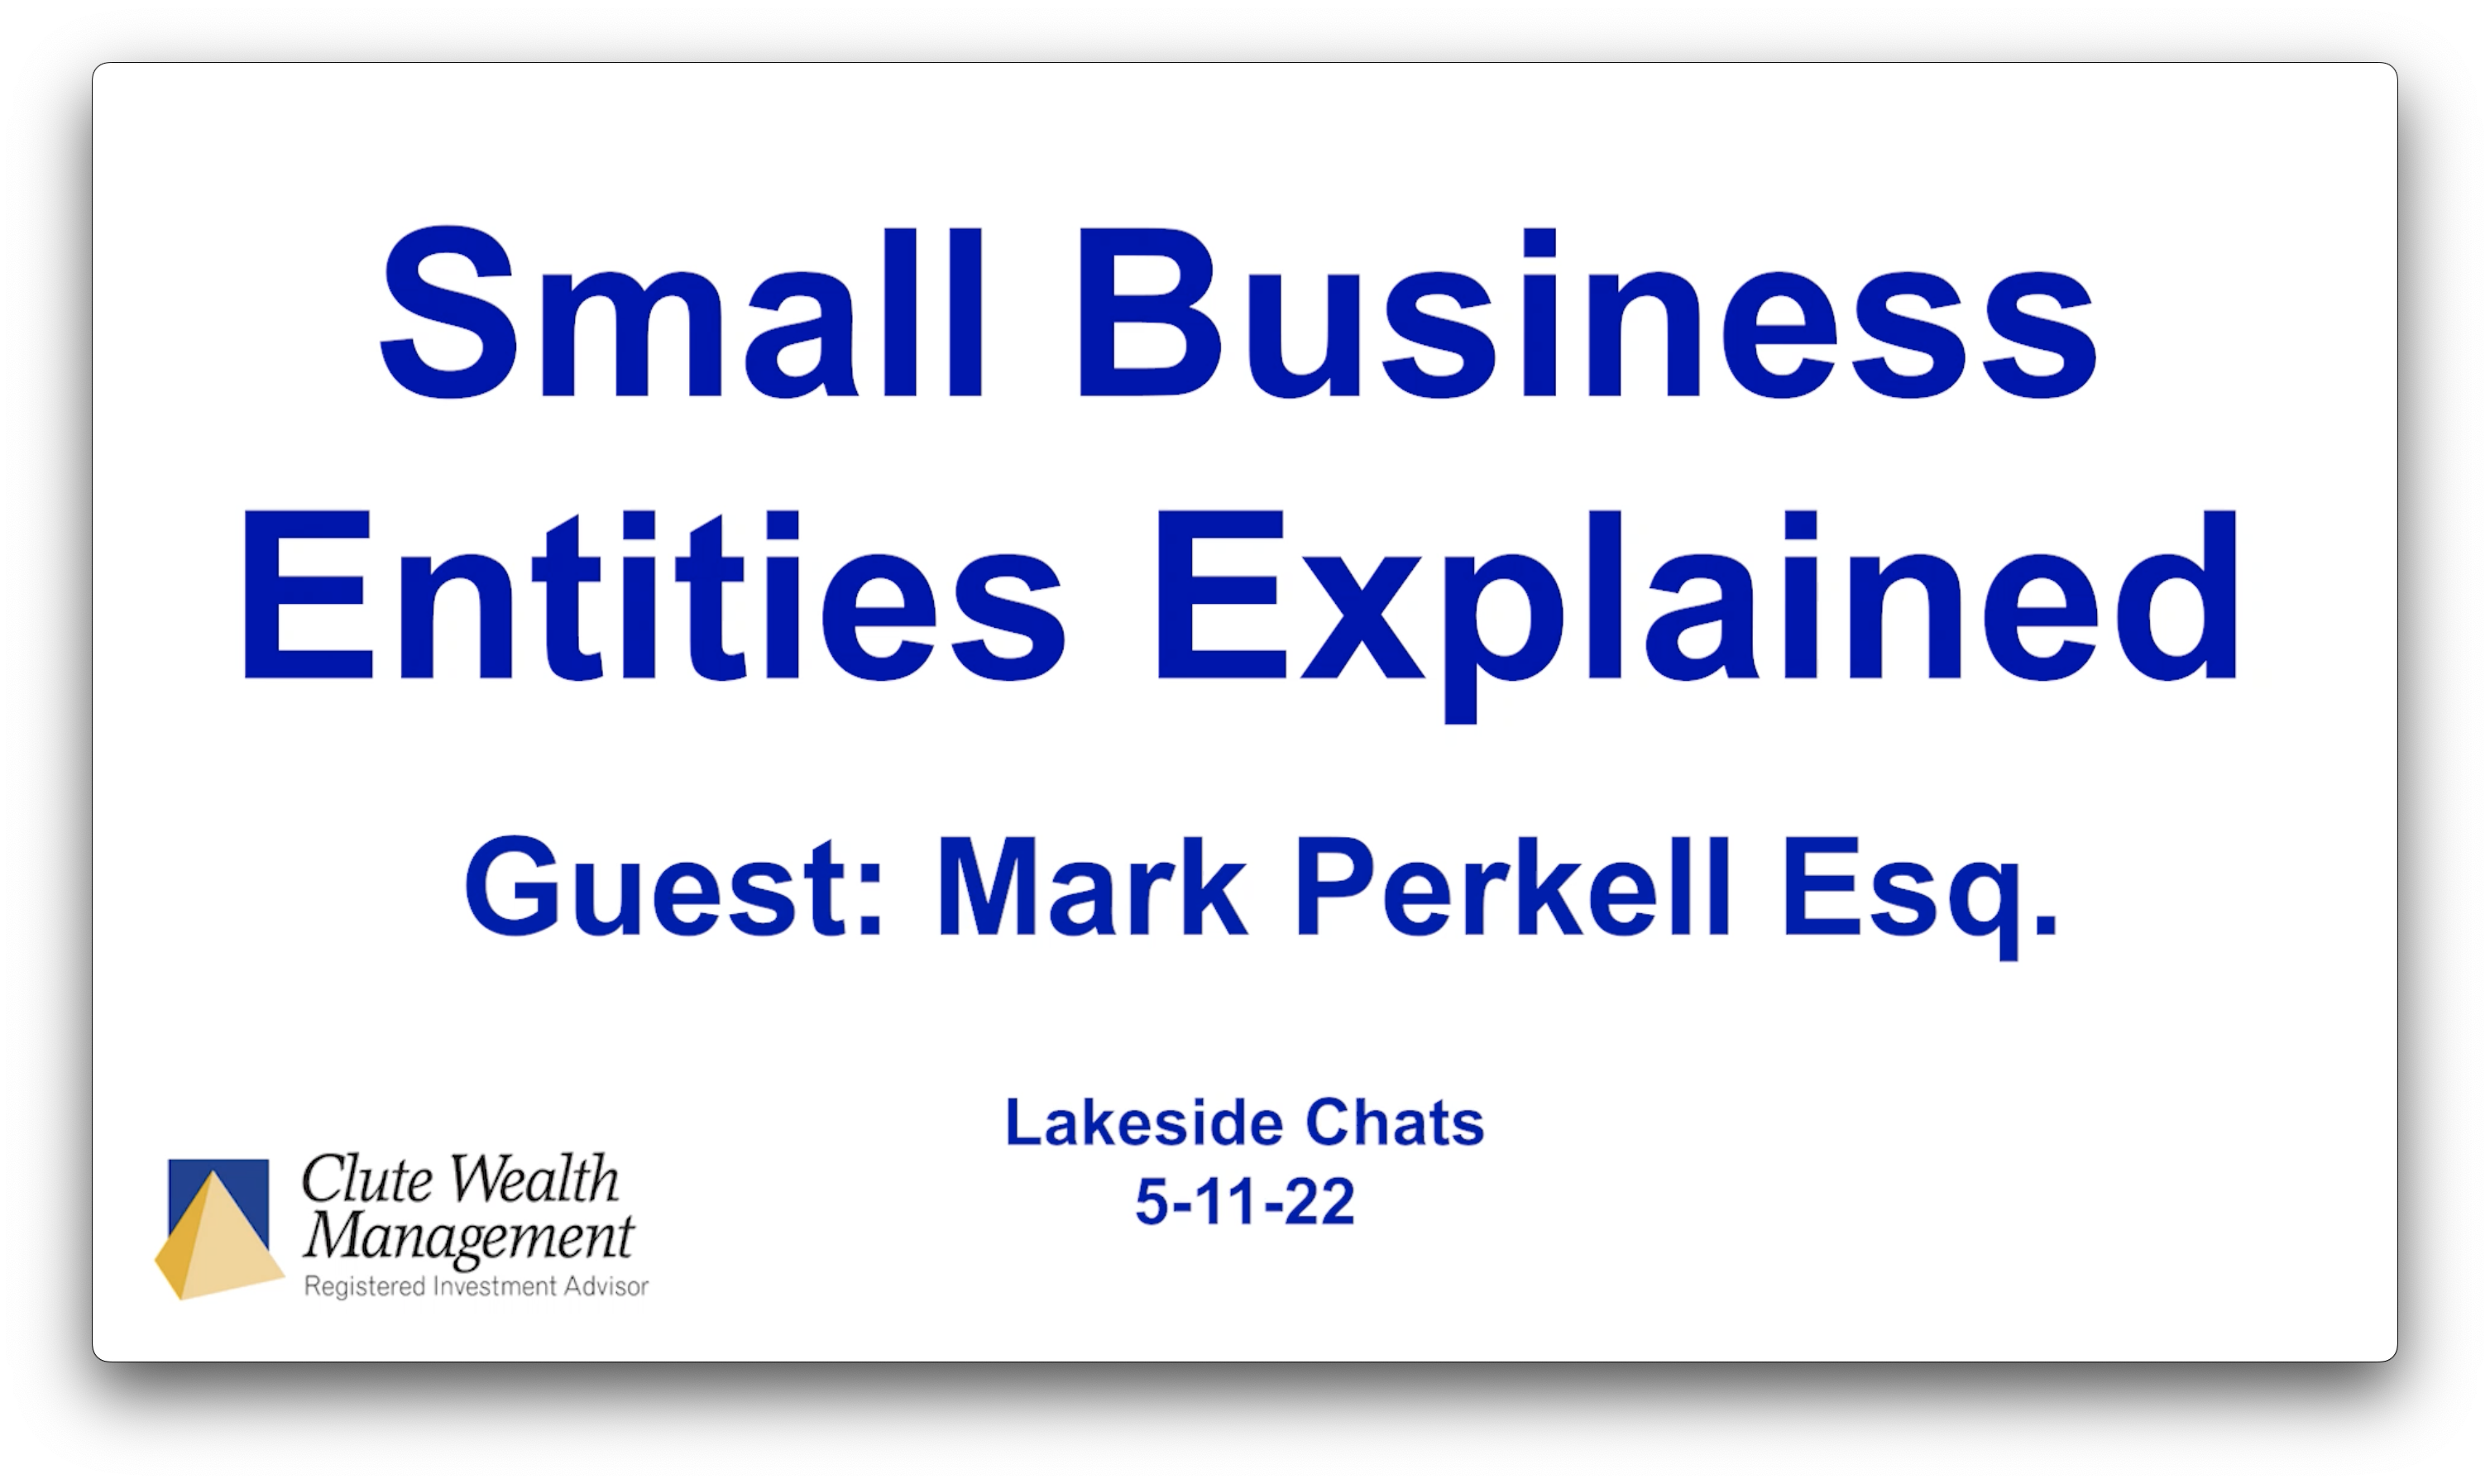 Small business entities explaine - guest: mark perkell esq. Lakeside Chats 5-11-22